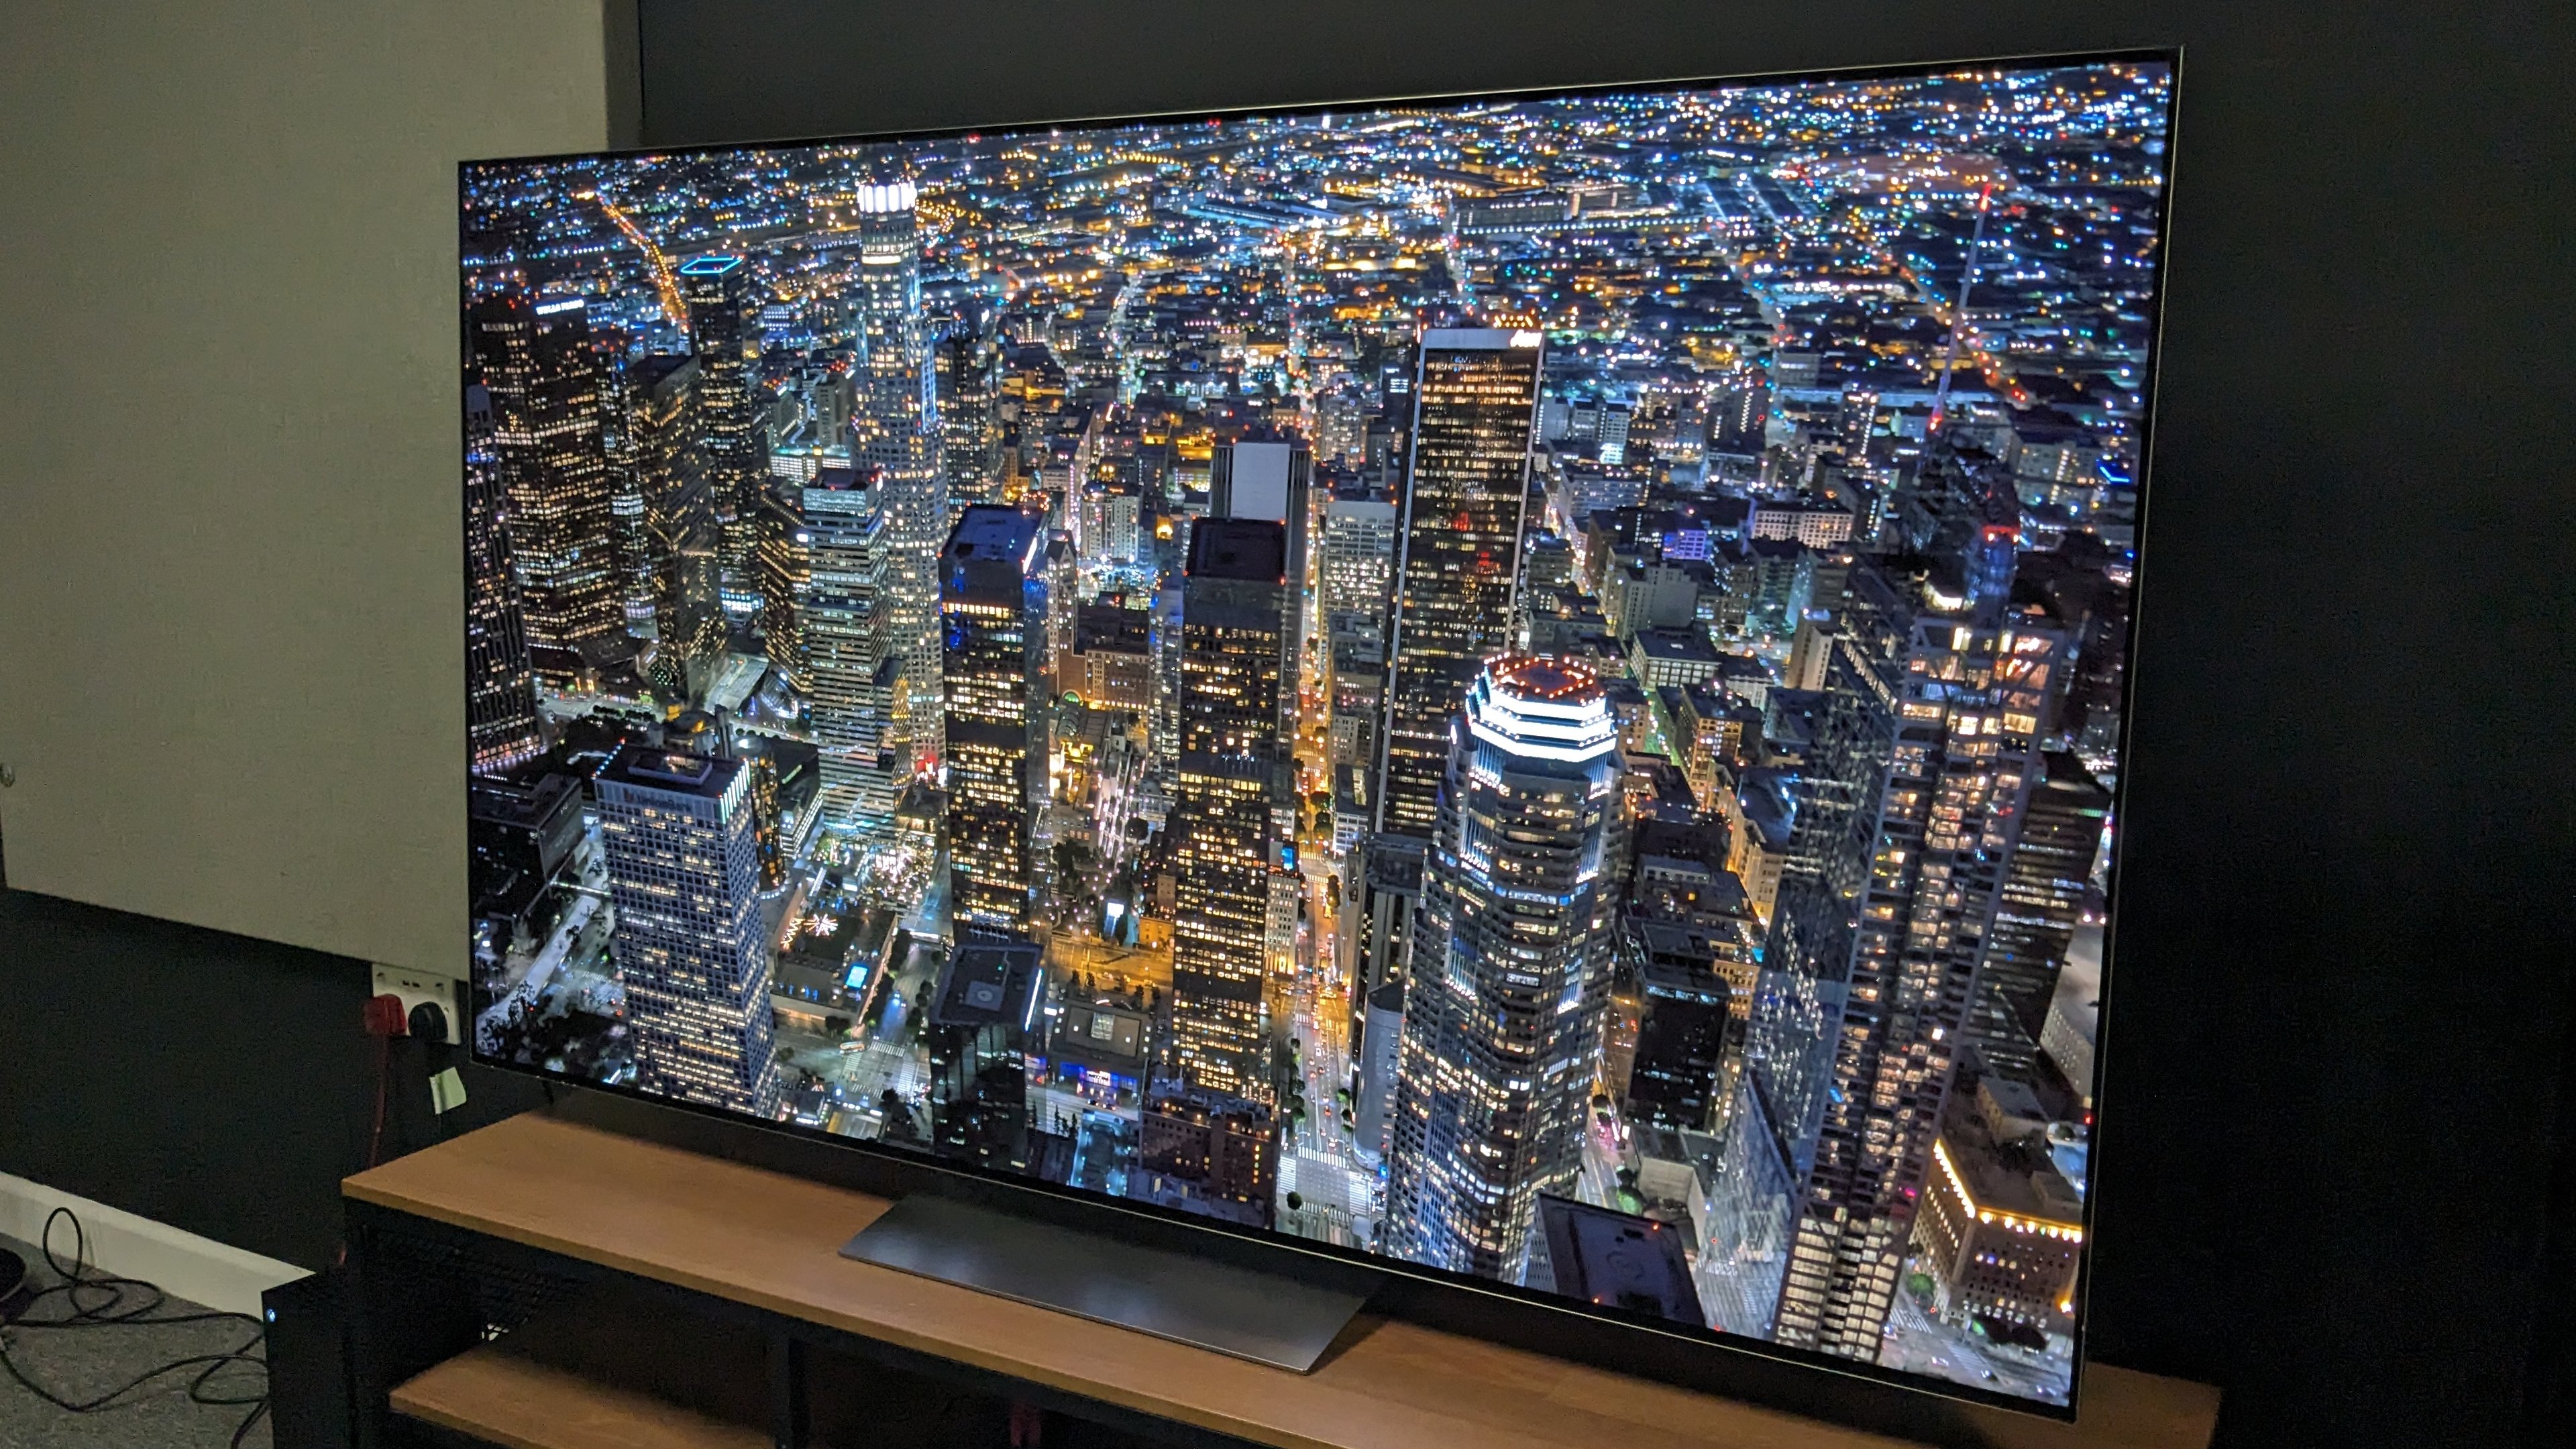 LG G3 OLED review: LG's brightest OLED TV ever delivers elite pictures